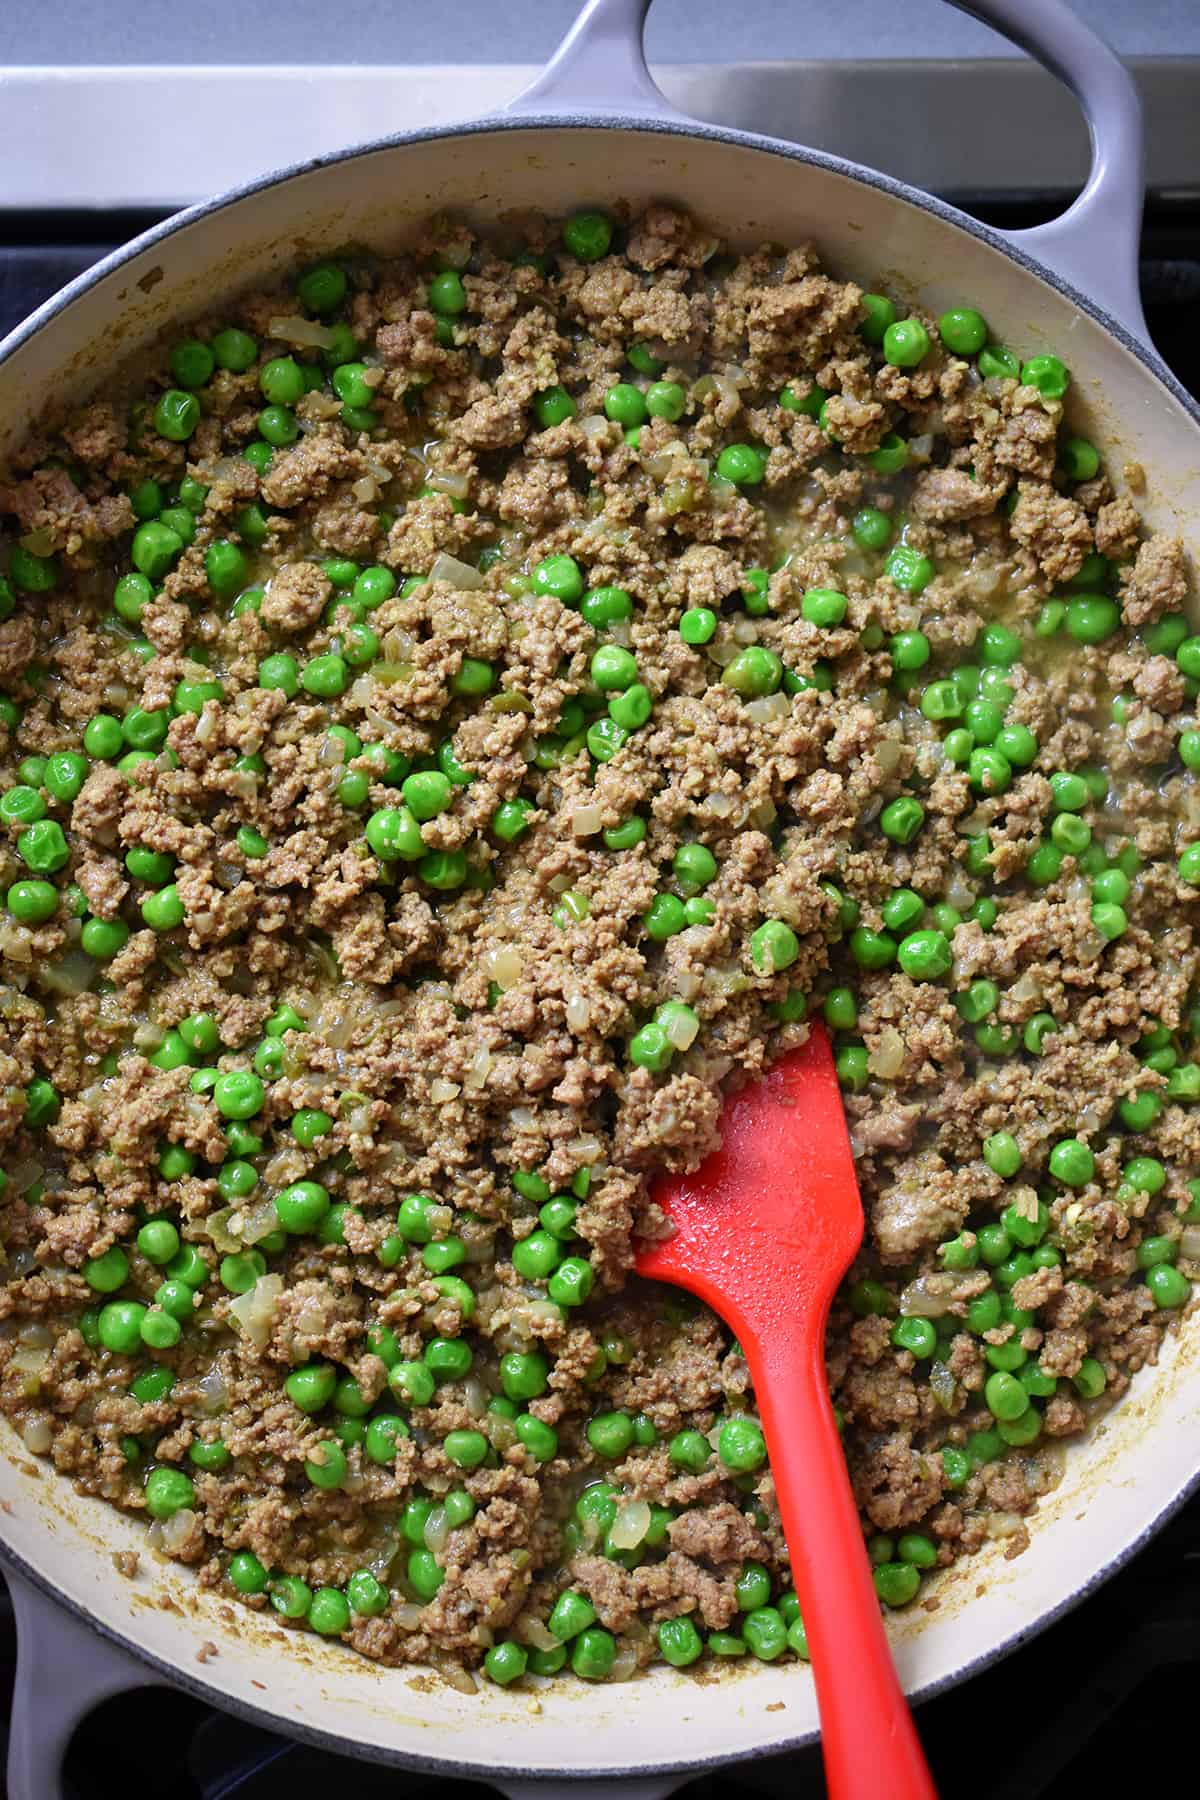 An overhead shot of a skillet filled with the Indian-spiced ground beef and green pea filling for an Indian-spiced shepherd's pie.